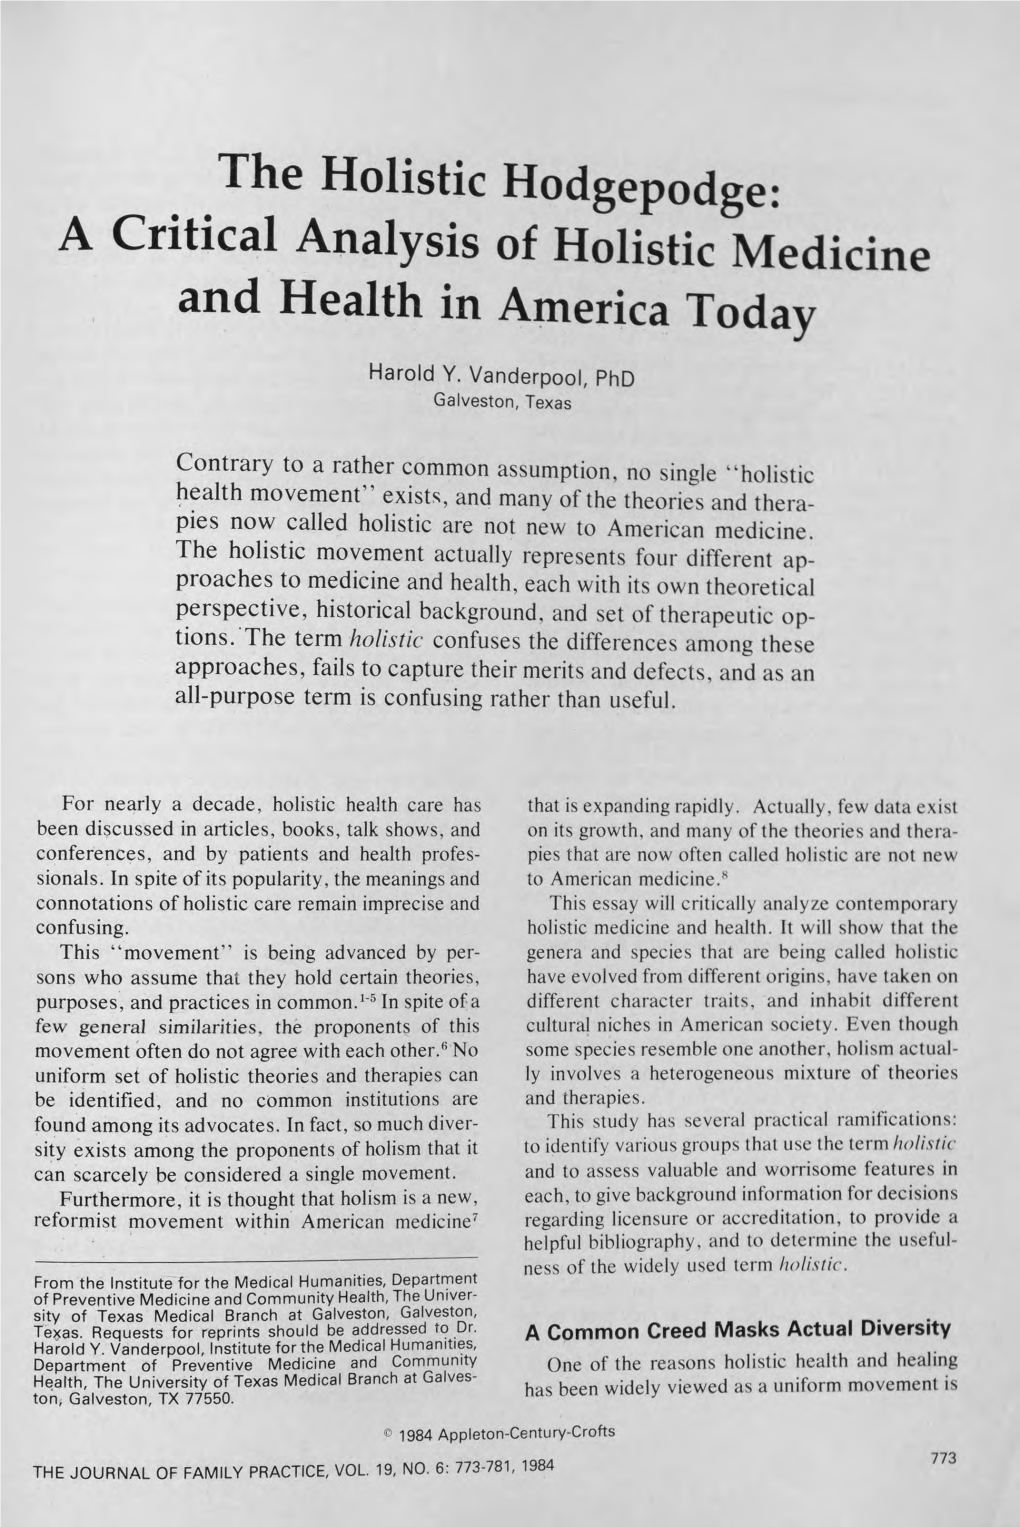 The Holistic Hodgepodge: a Critical Analysis of Holistic Medicine and Health in America Today